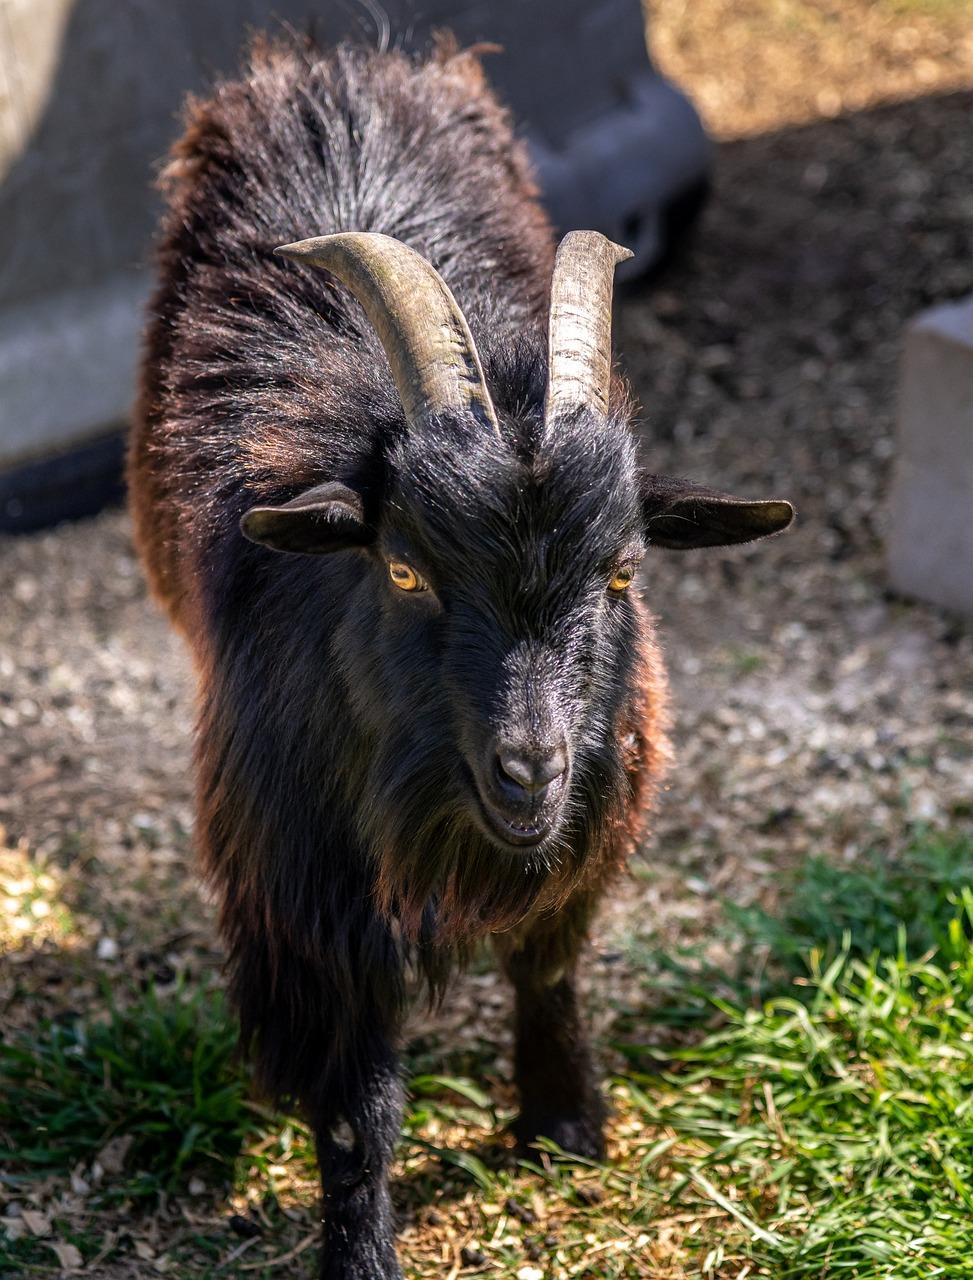 Are goats omnivores or carnivores? 